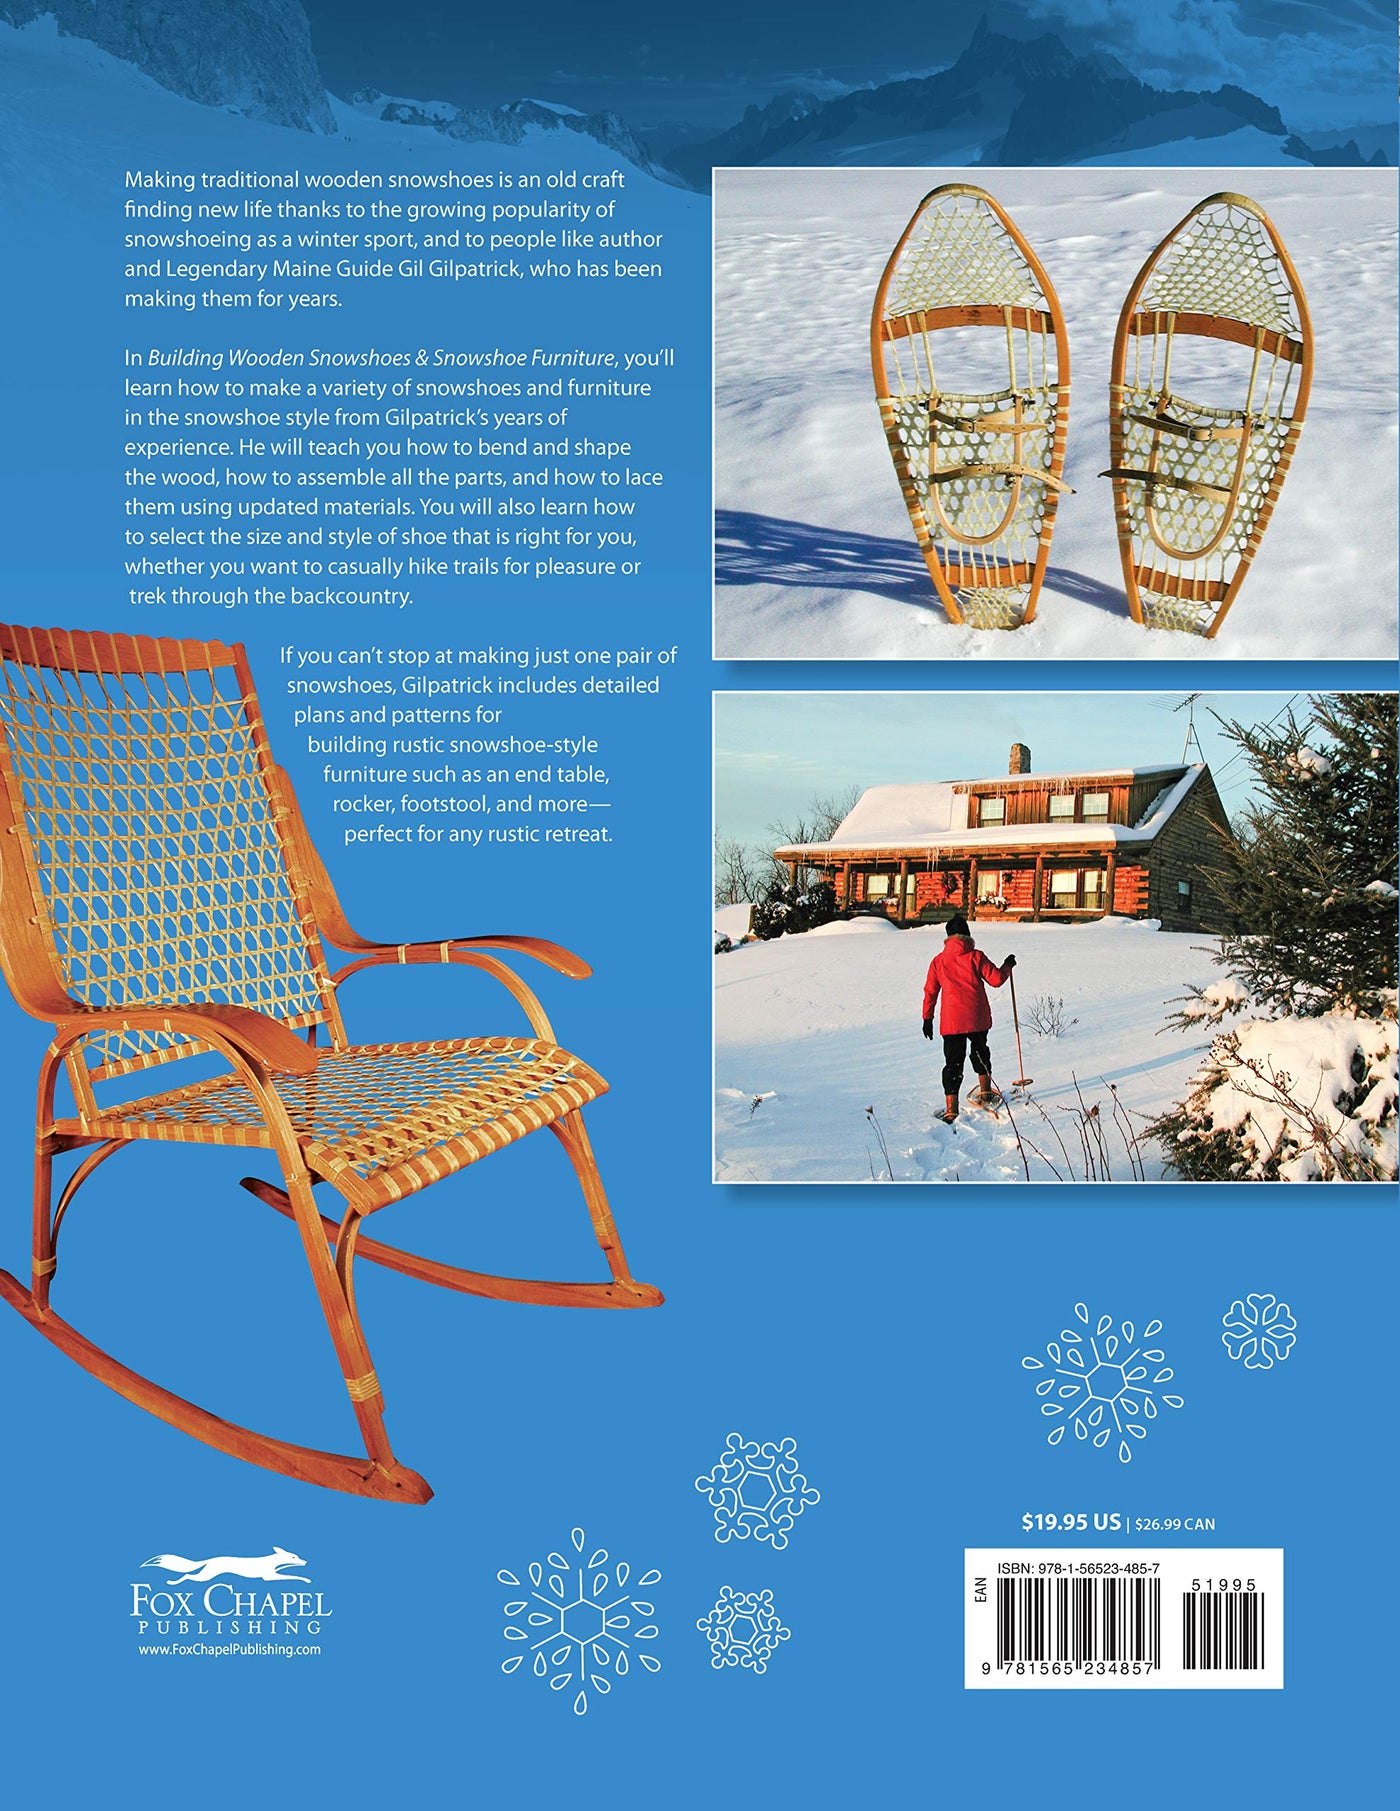 Building Wooden Snowshoes & Snowshoe Furniture: Winner of "Legendary Maine Guide" Award